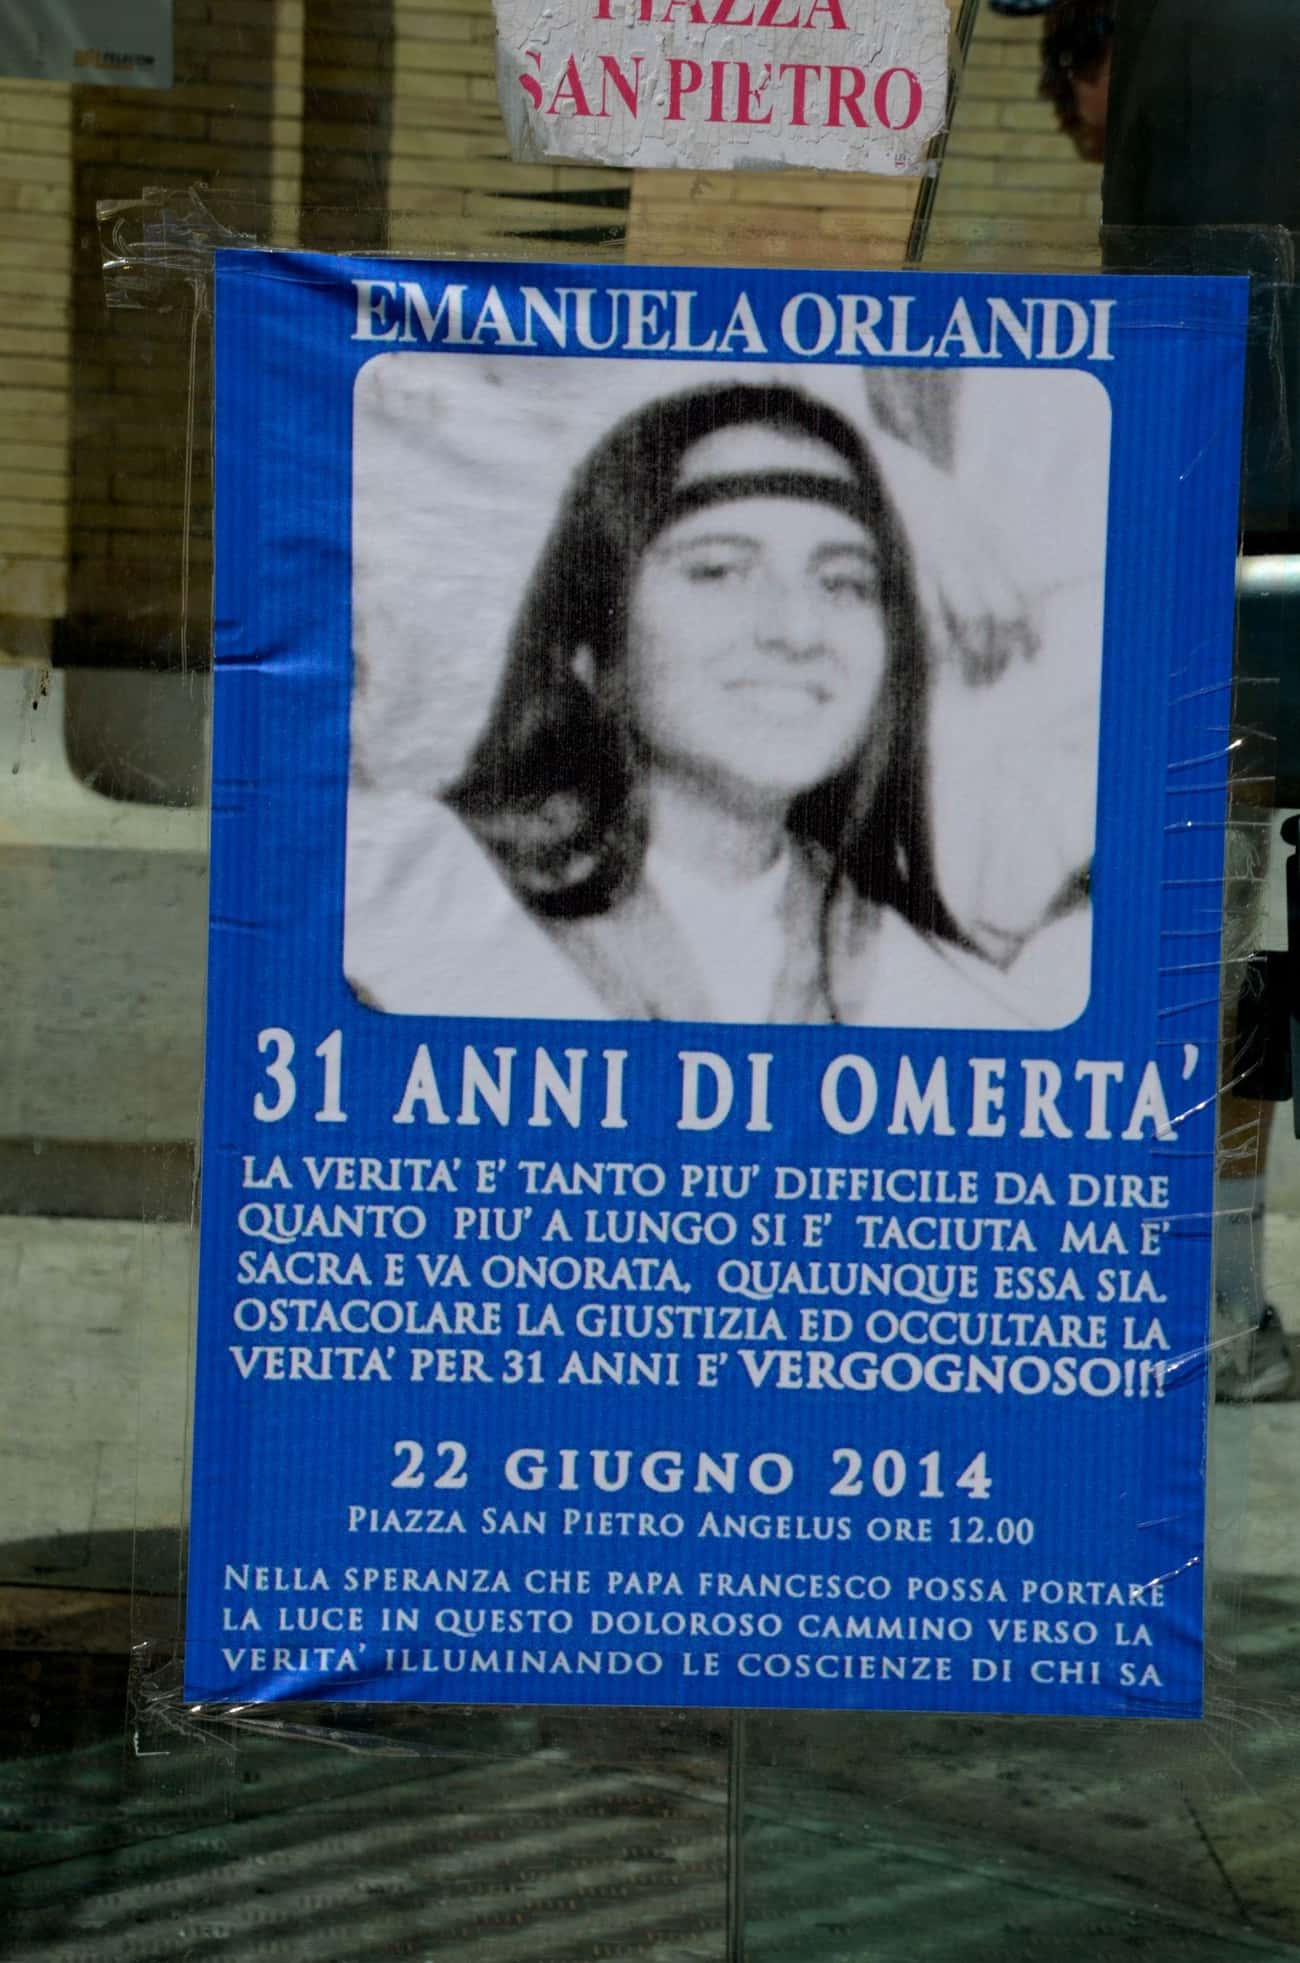 15-Year-Old Emanuela Orlandi Vanished From A Busy Rome Street In 1983 